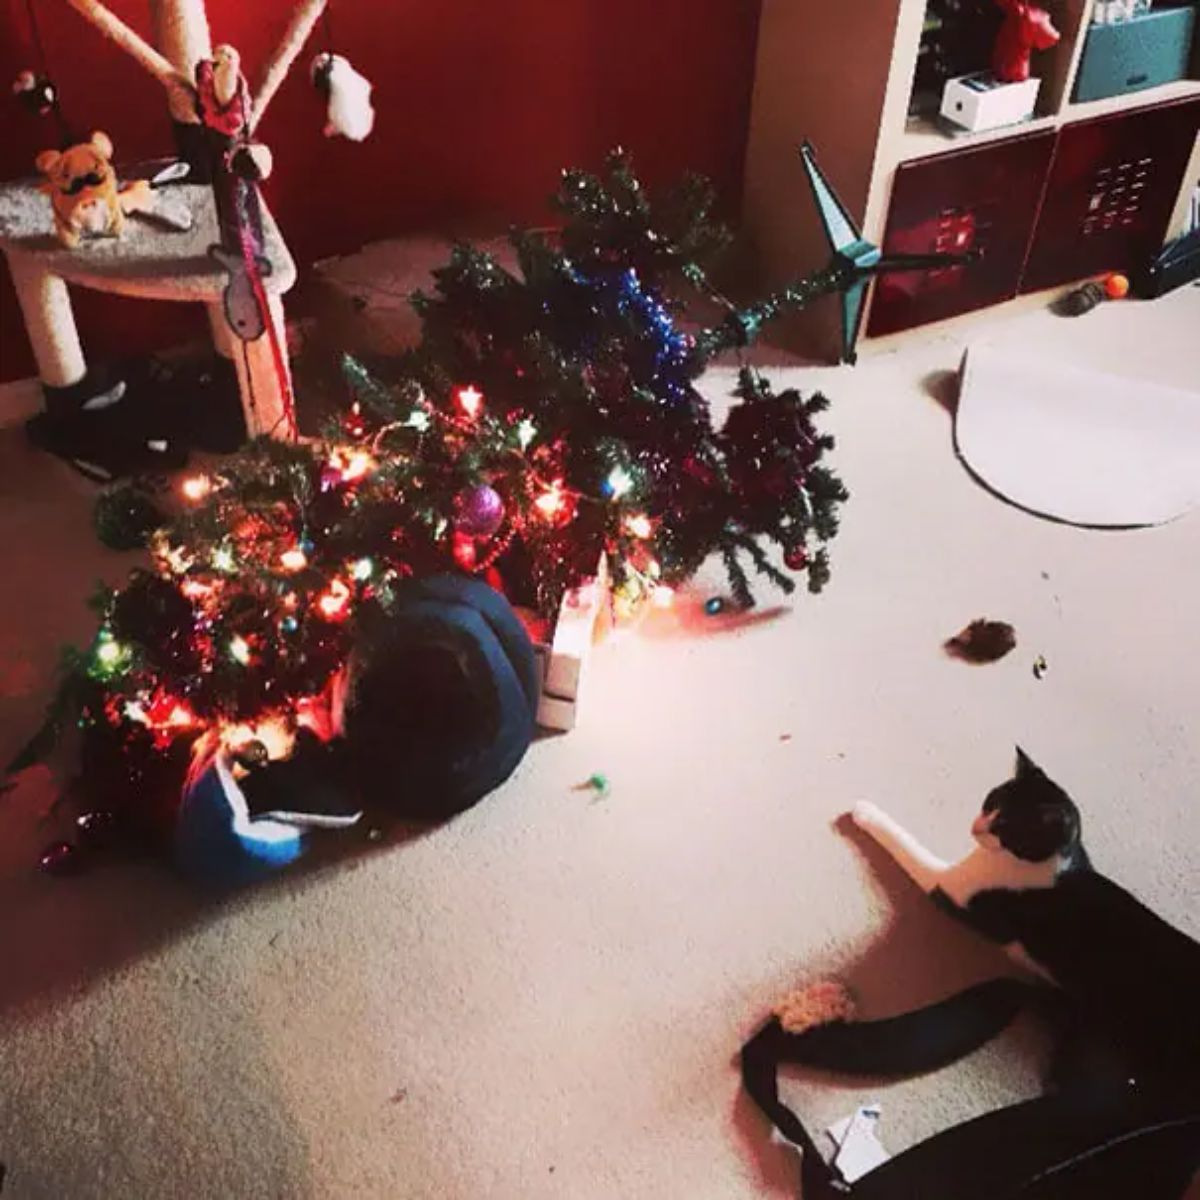 black and white cat laying on carpet watching a christmas tree toppled over on its side